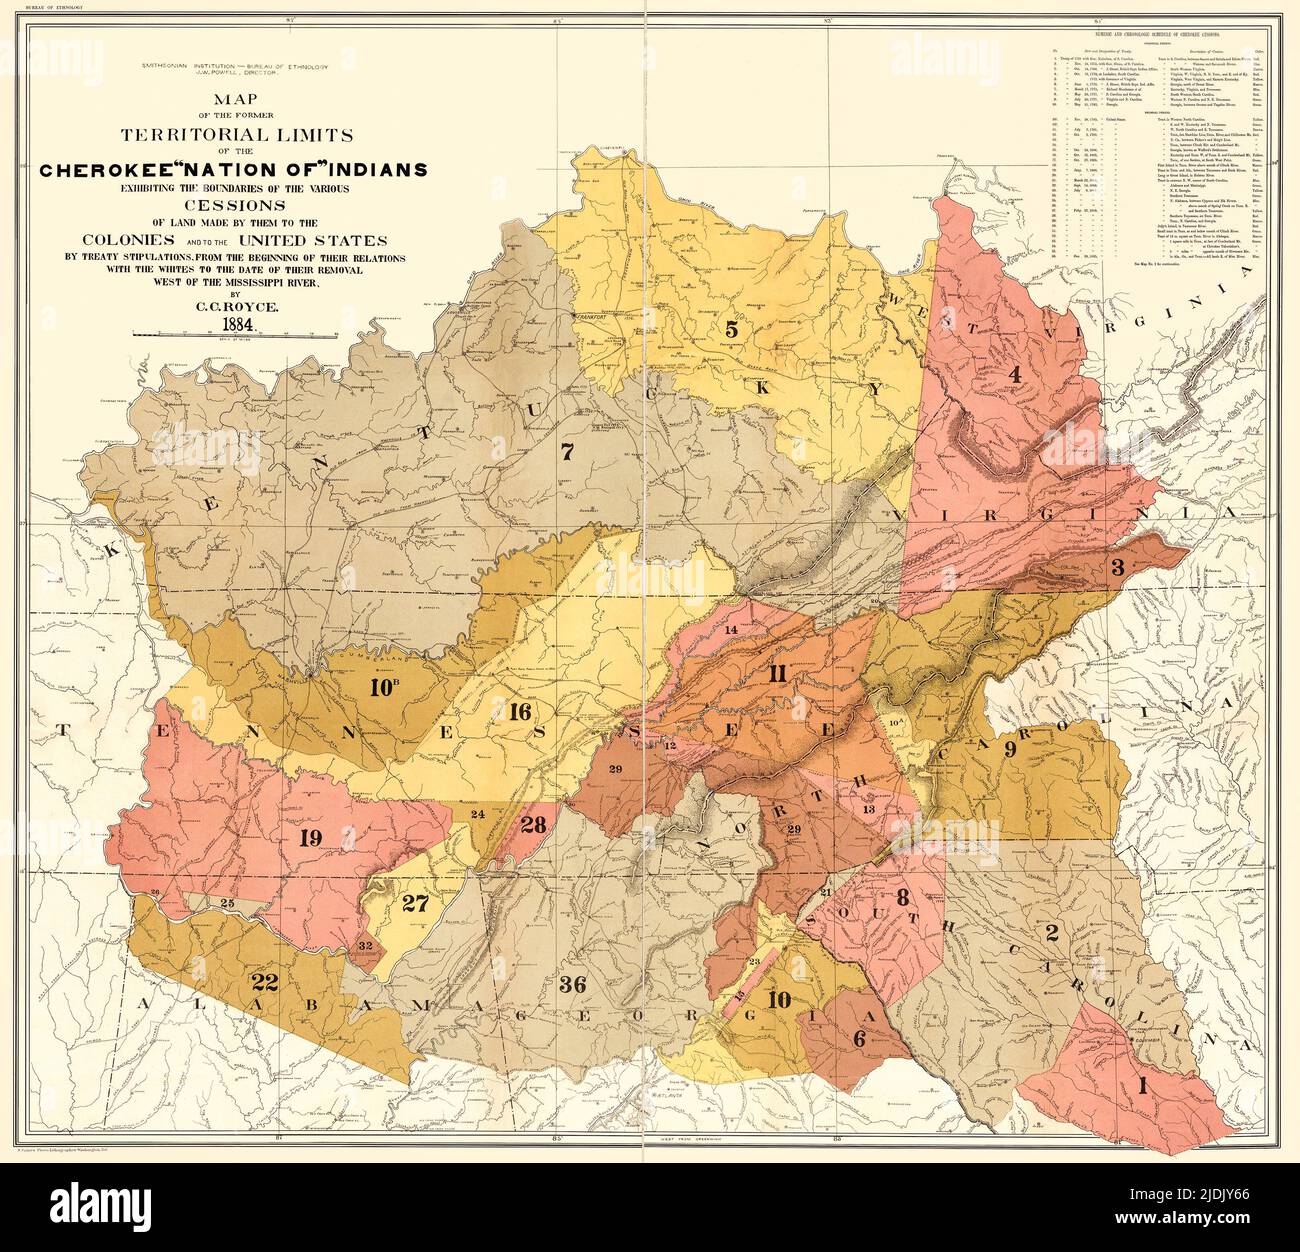 An enhanced, restored reproduction of a map of the former territorial limits of the Cherokee 'Nation of' Indians 1884. Issued by the Bureau of Ethnology of the Smithsonian Institution as noted in the corner of the map. Indicates chronology of Cherokee cessions of land. Shows ancestral lands in states east of the Mississippi. Stock Photo